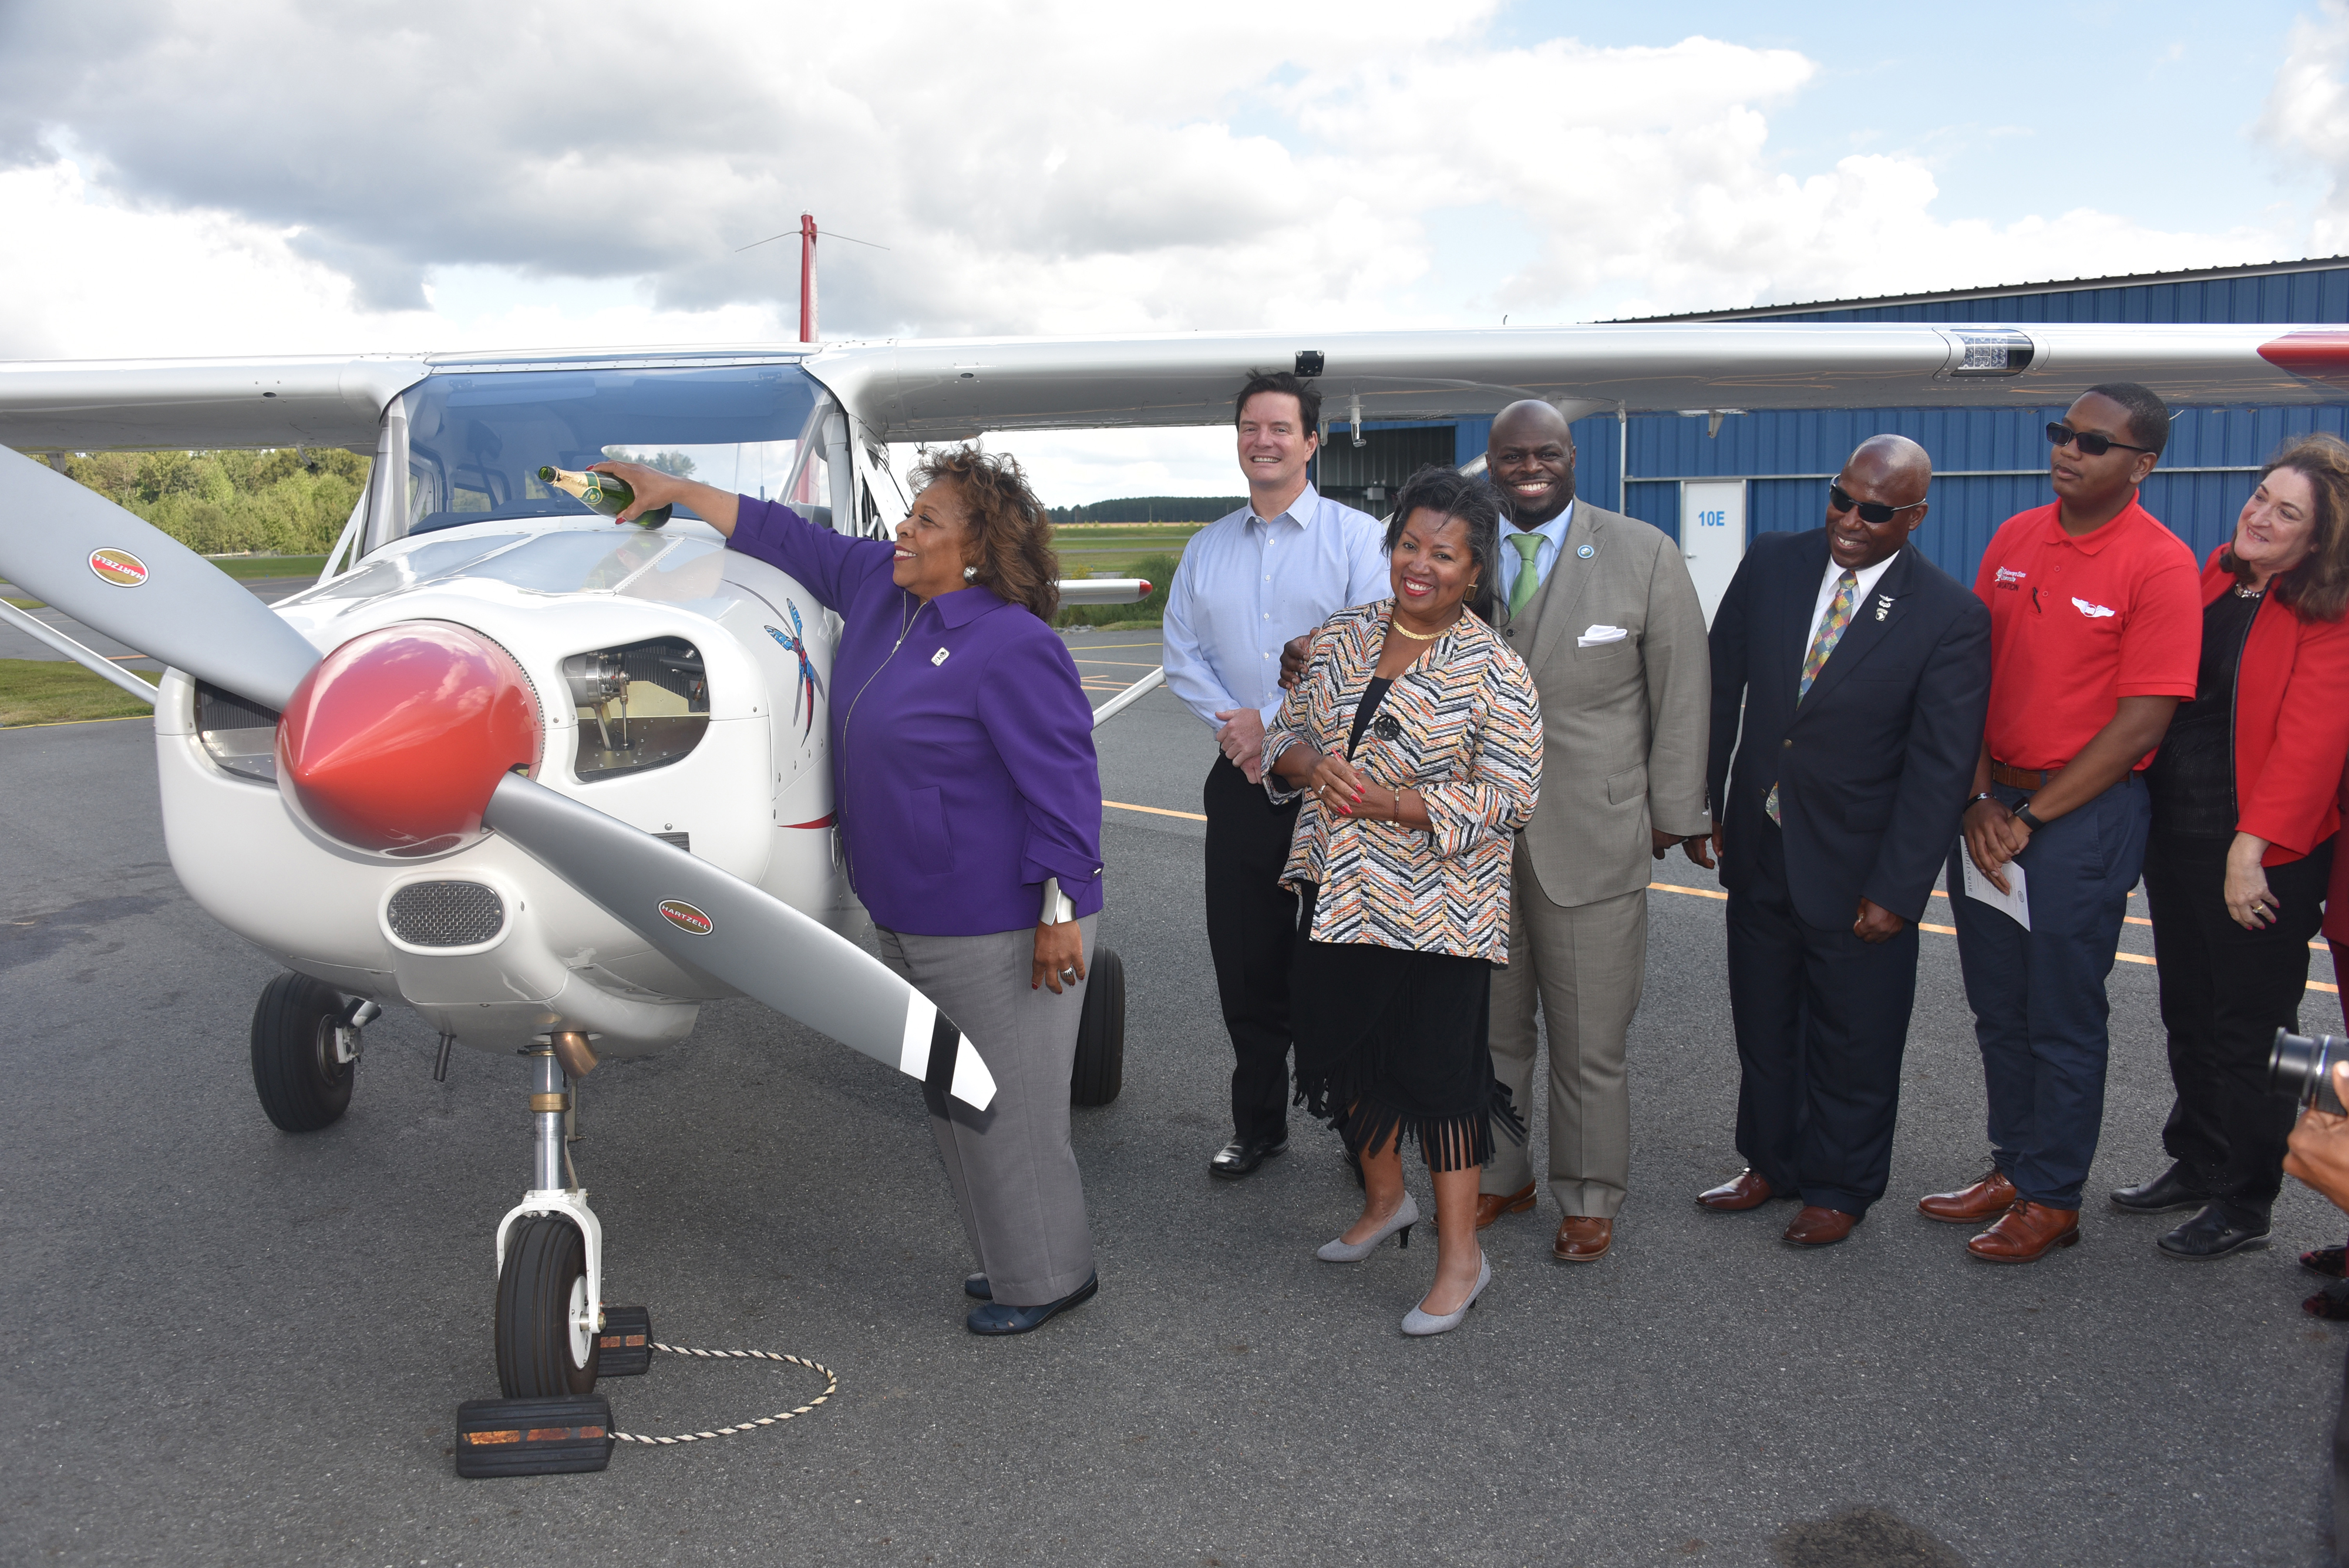 University President Wilma Mishoe christens the Aviation Program's newest aircraft, which is the first of a new 11-plane fleet that is slated to be delivered soon.